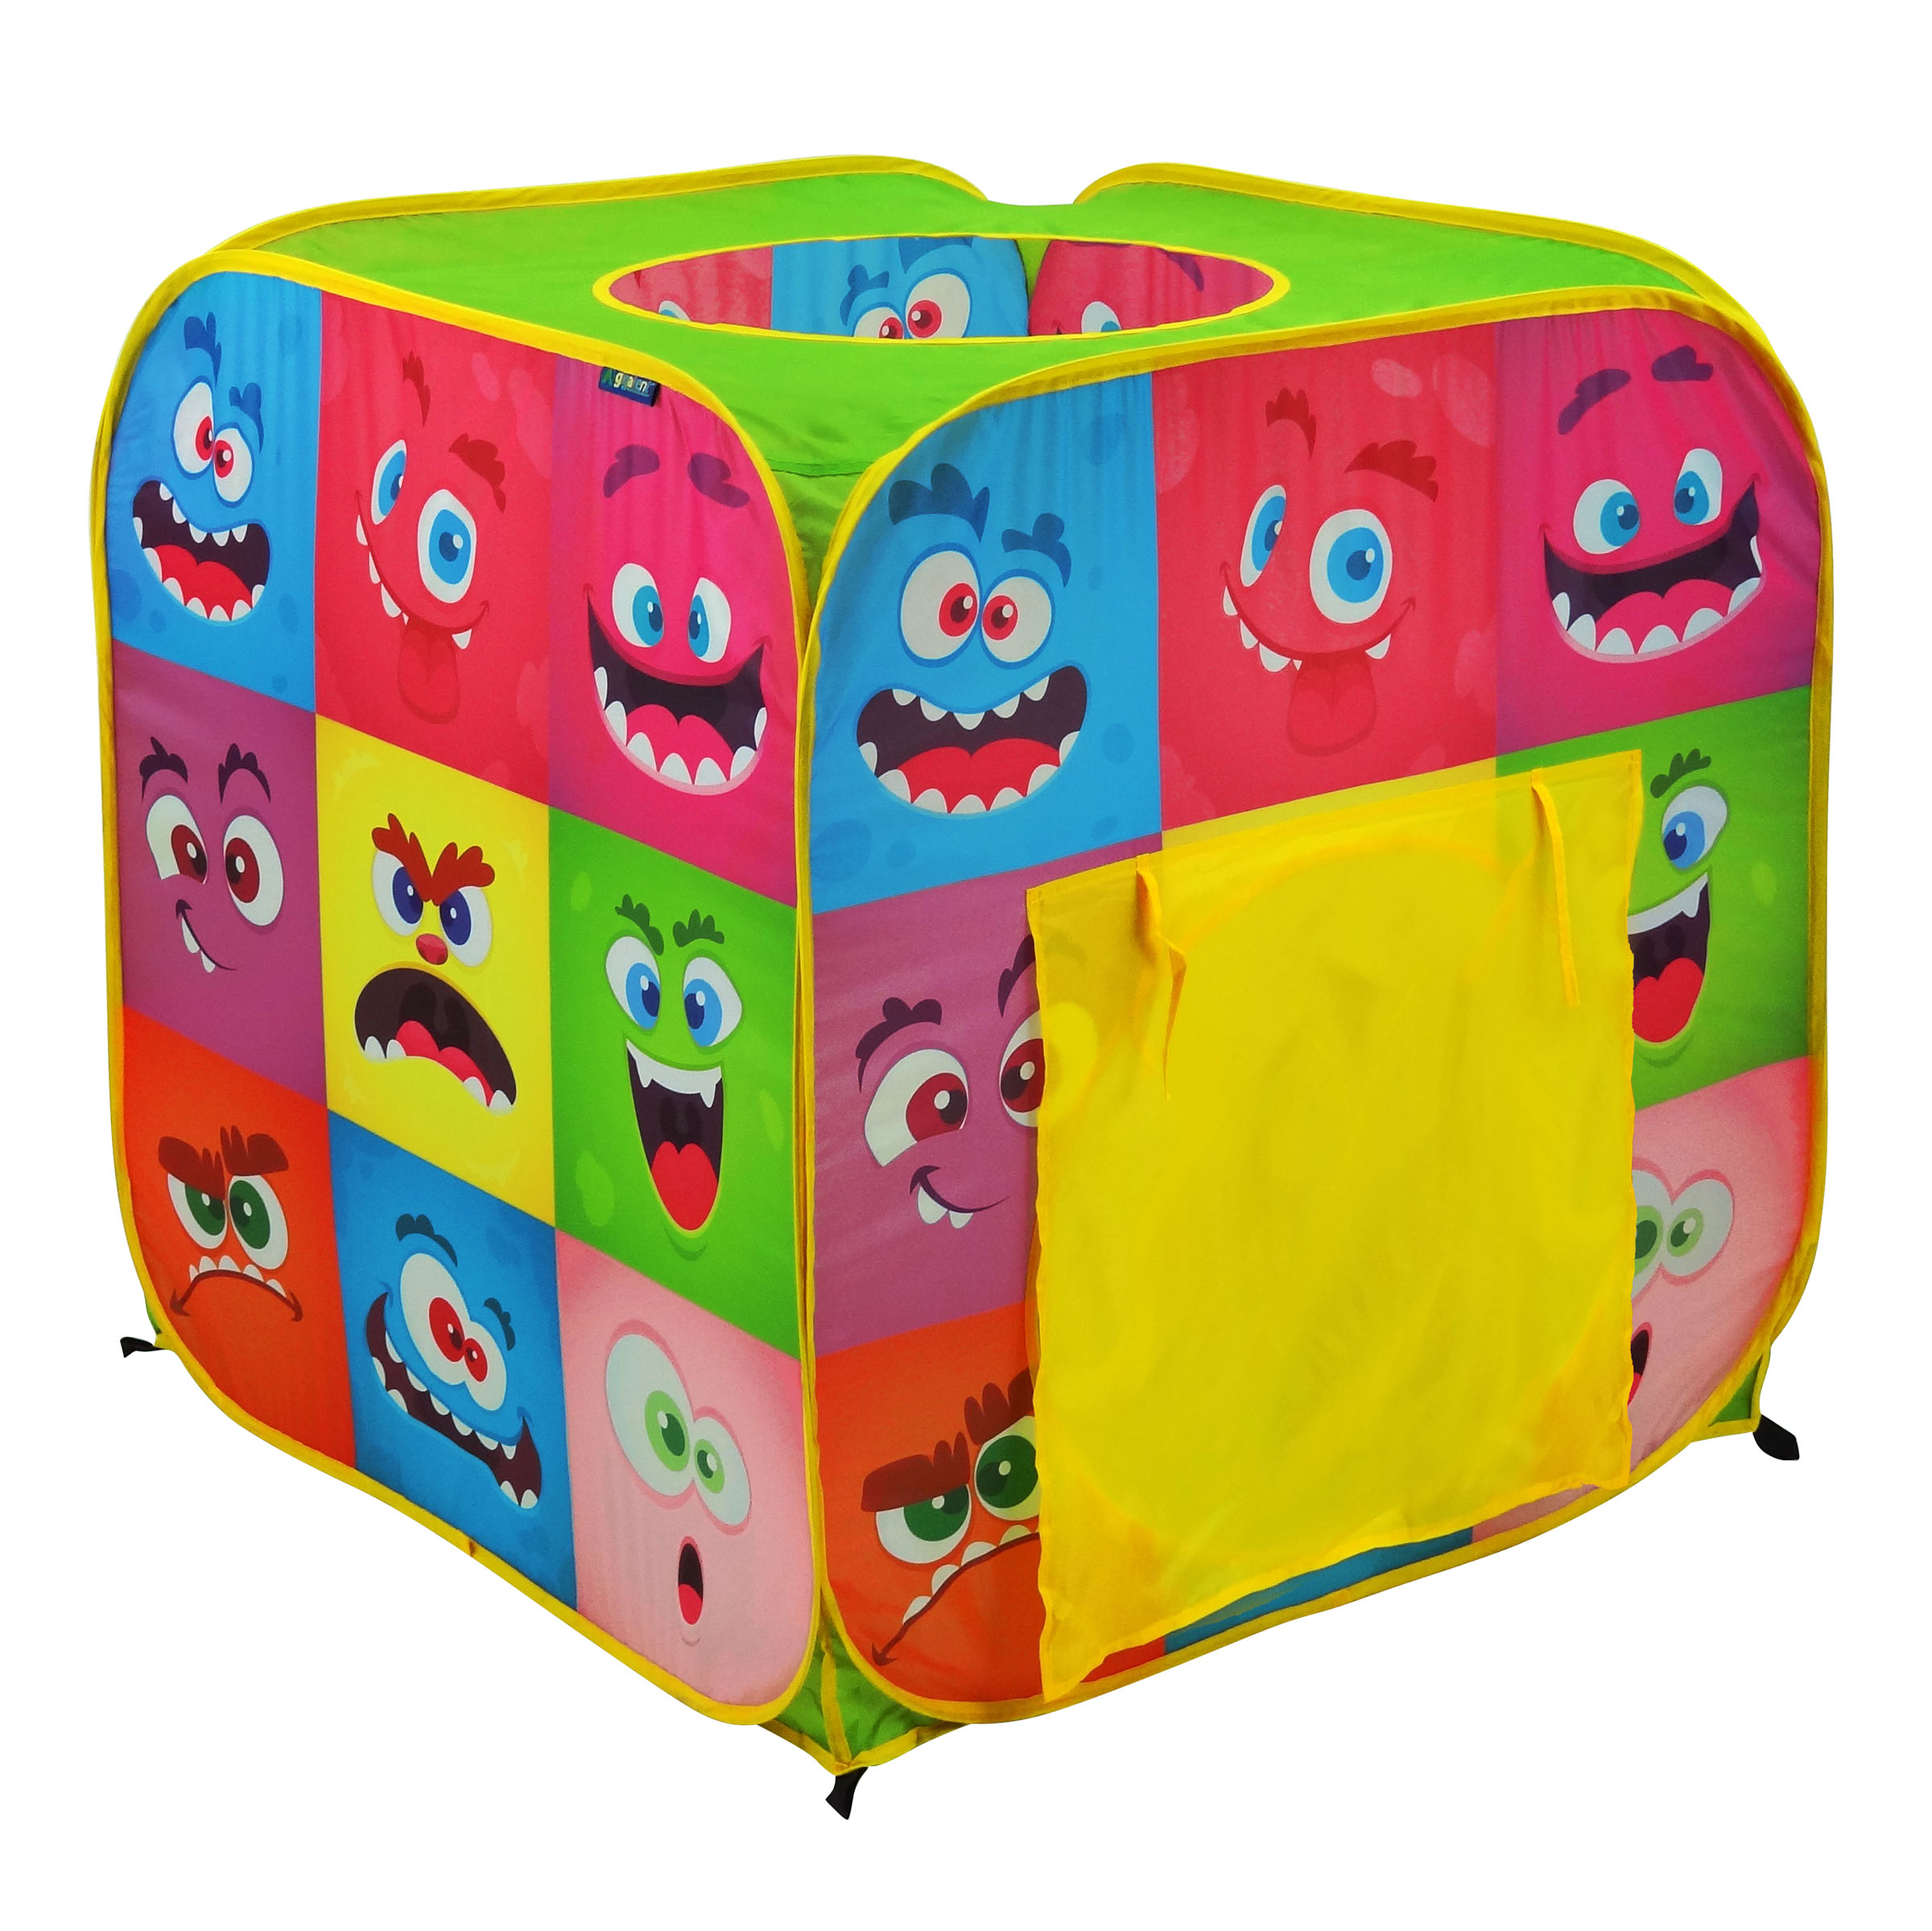 Monster Cube play tent cube - image 1 of 5